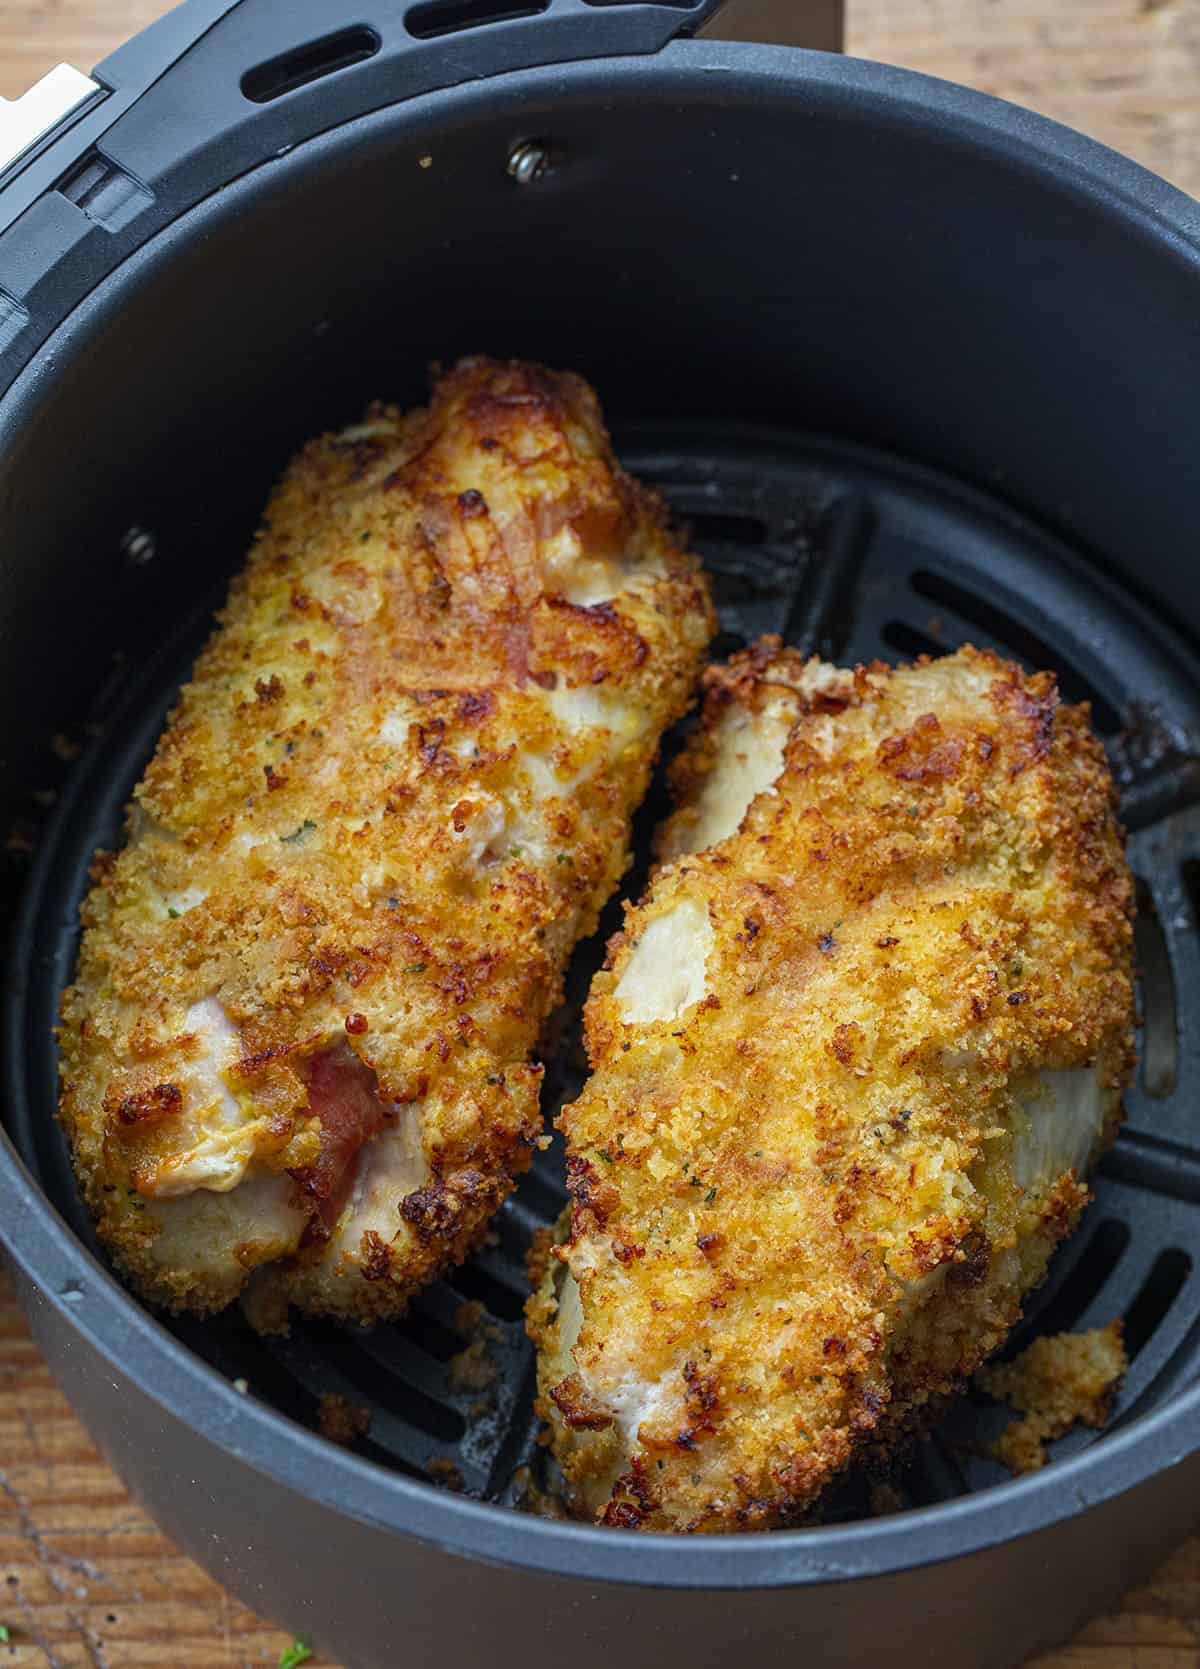 Two Chicken Cordon Bleu's in a Air Fryer Basket. Dinner, Supper, Air Fryer Recipes, Chicken, Chicken Recipes, Chicken Cordon Bleu, Air Fryer Chicken Cordon Bleu, Swiss Cheese Sauce, How to Make Cheesy Sauce with Swiss Cheese, i am homesteader, iamhomesteader